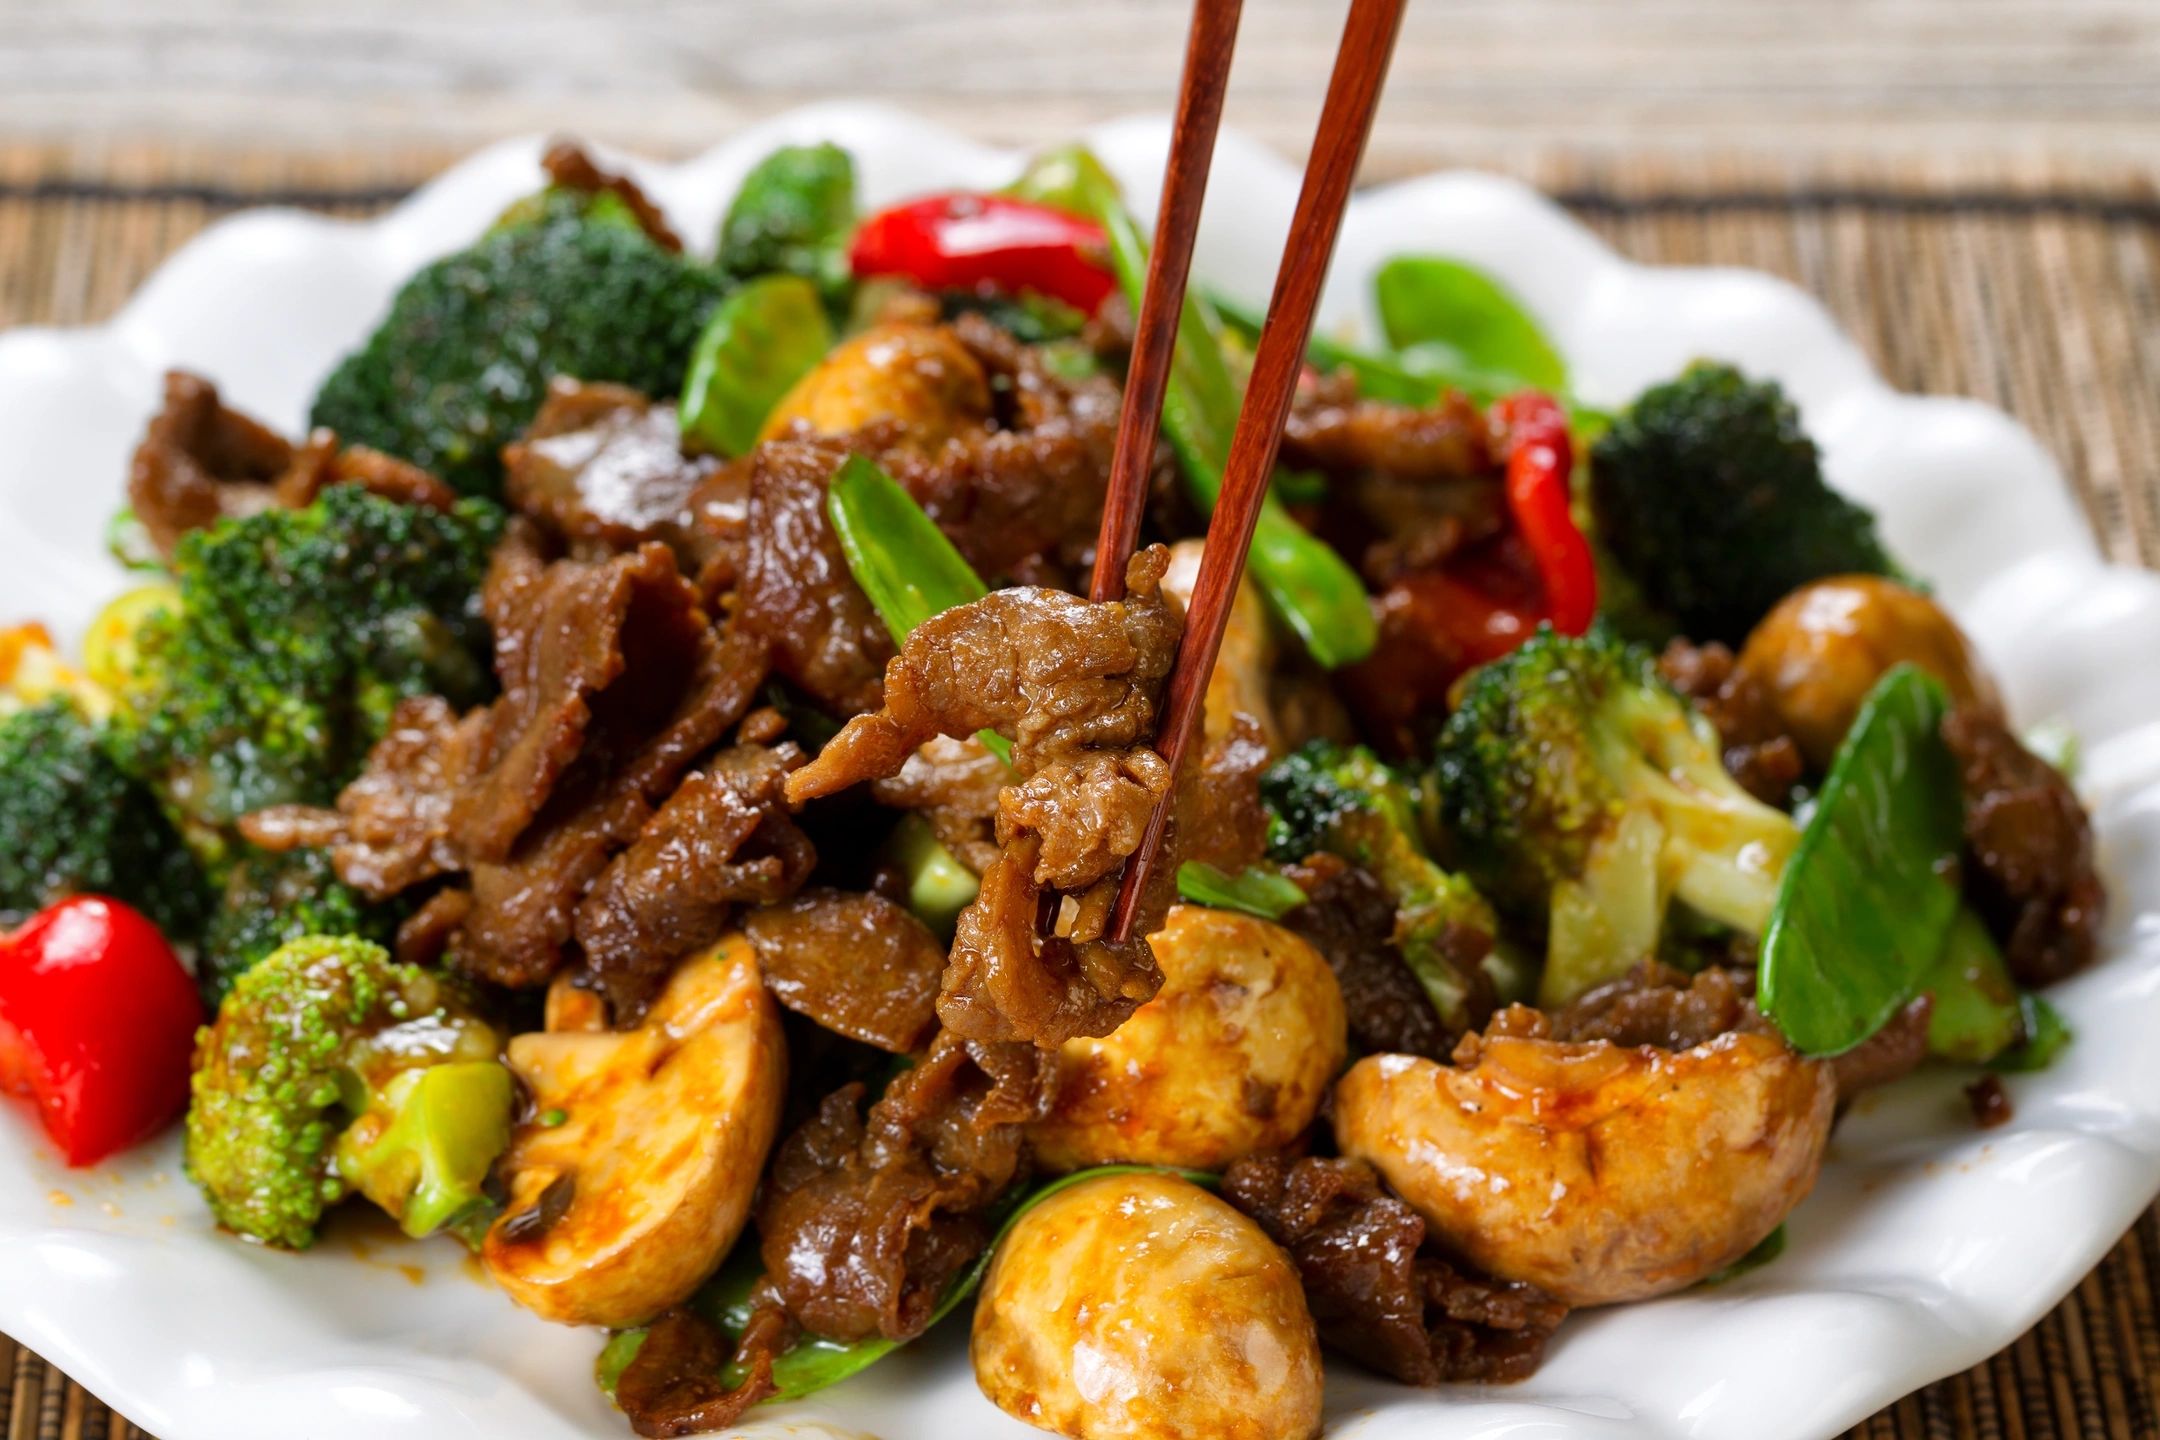 Plate of Beef with Broccoli and chop sticks